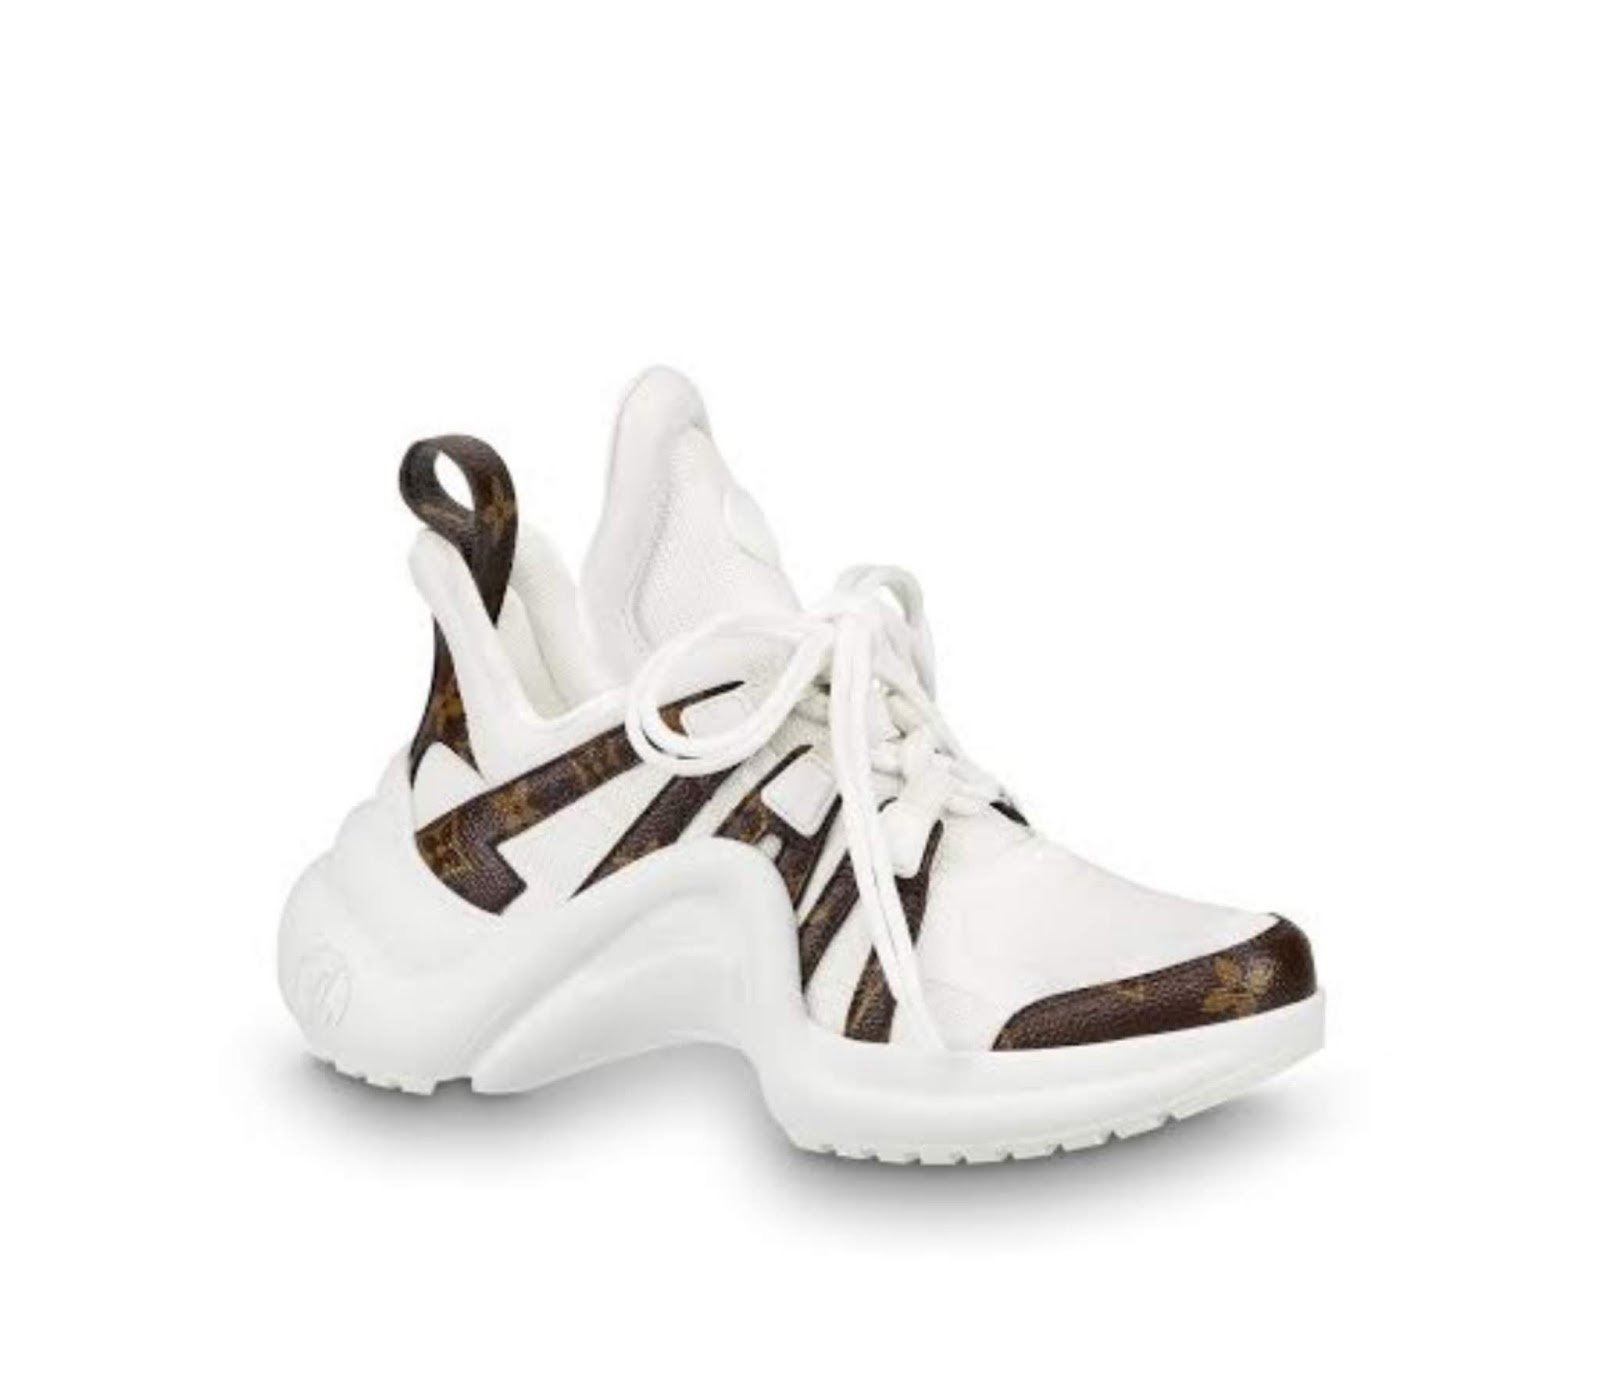 blog: Louis Vuitton archlight sneakers: a review